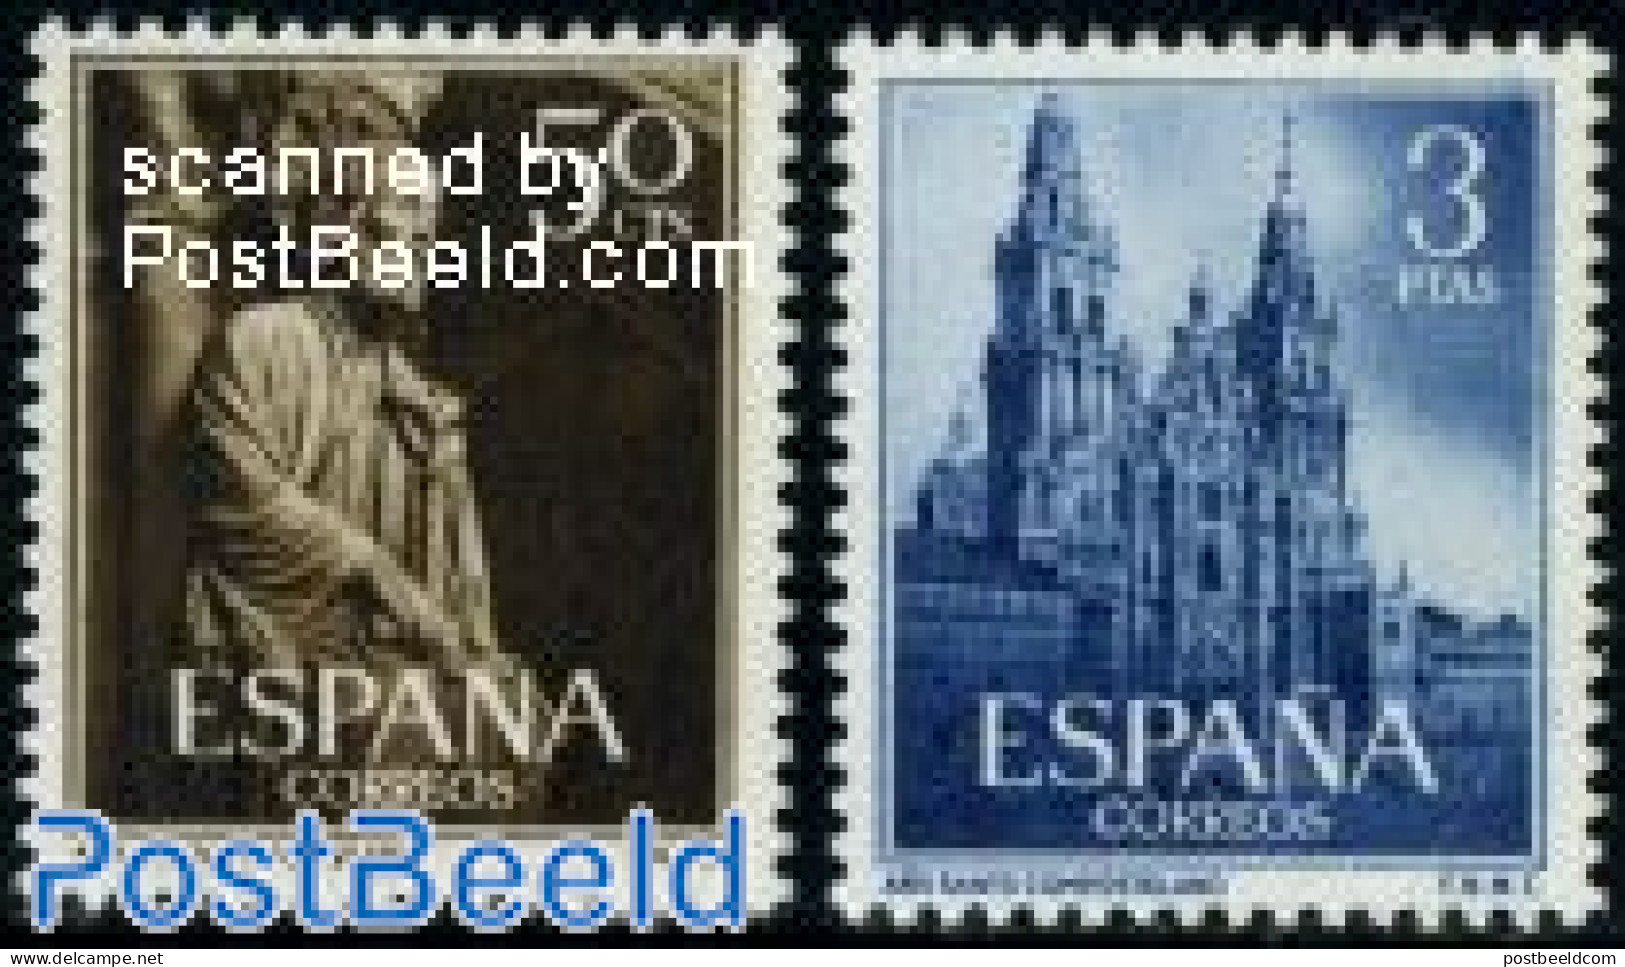 Spain 1954 Holy Year 2v, Mint NH, Religion - Churches, Temples, Mosques, Synagogues - Unused Stamps